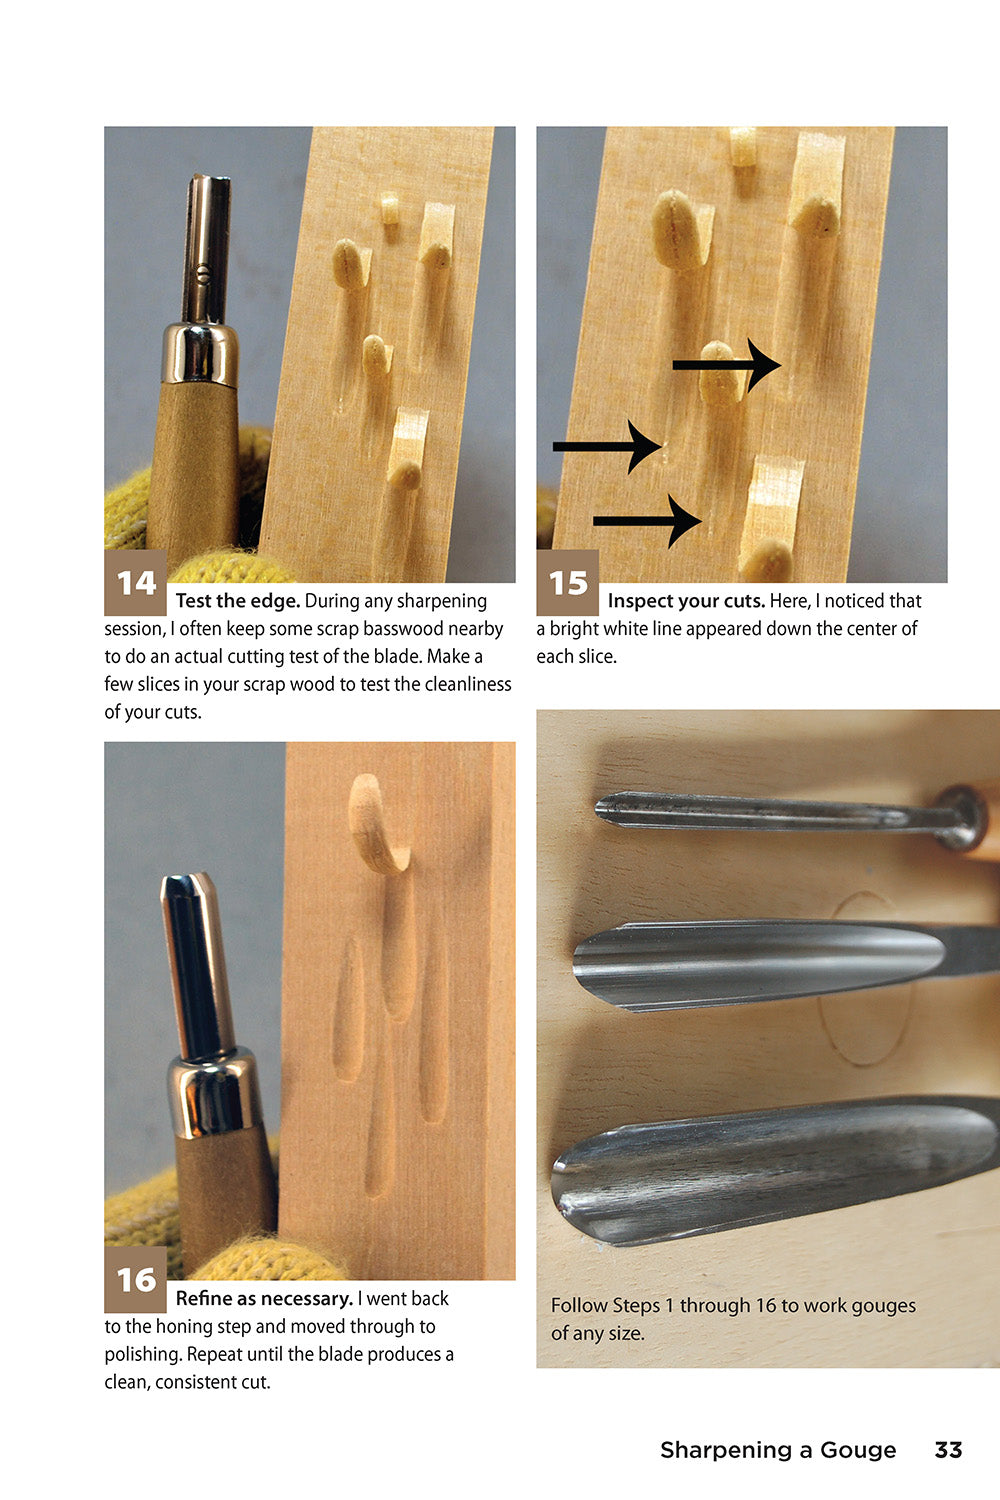 Sharpening Your Hand Tools: A Beginners Guide - Common Woodworking